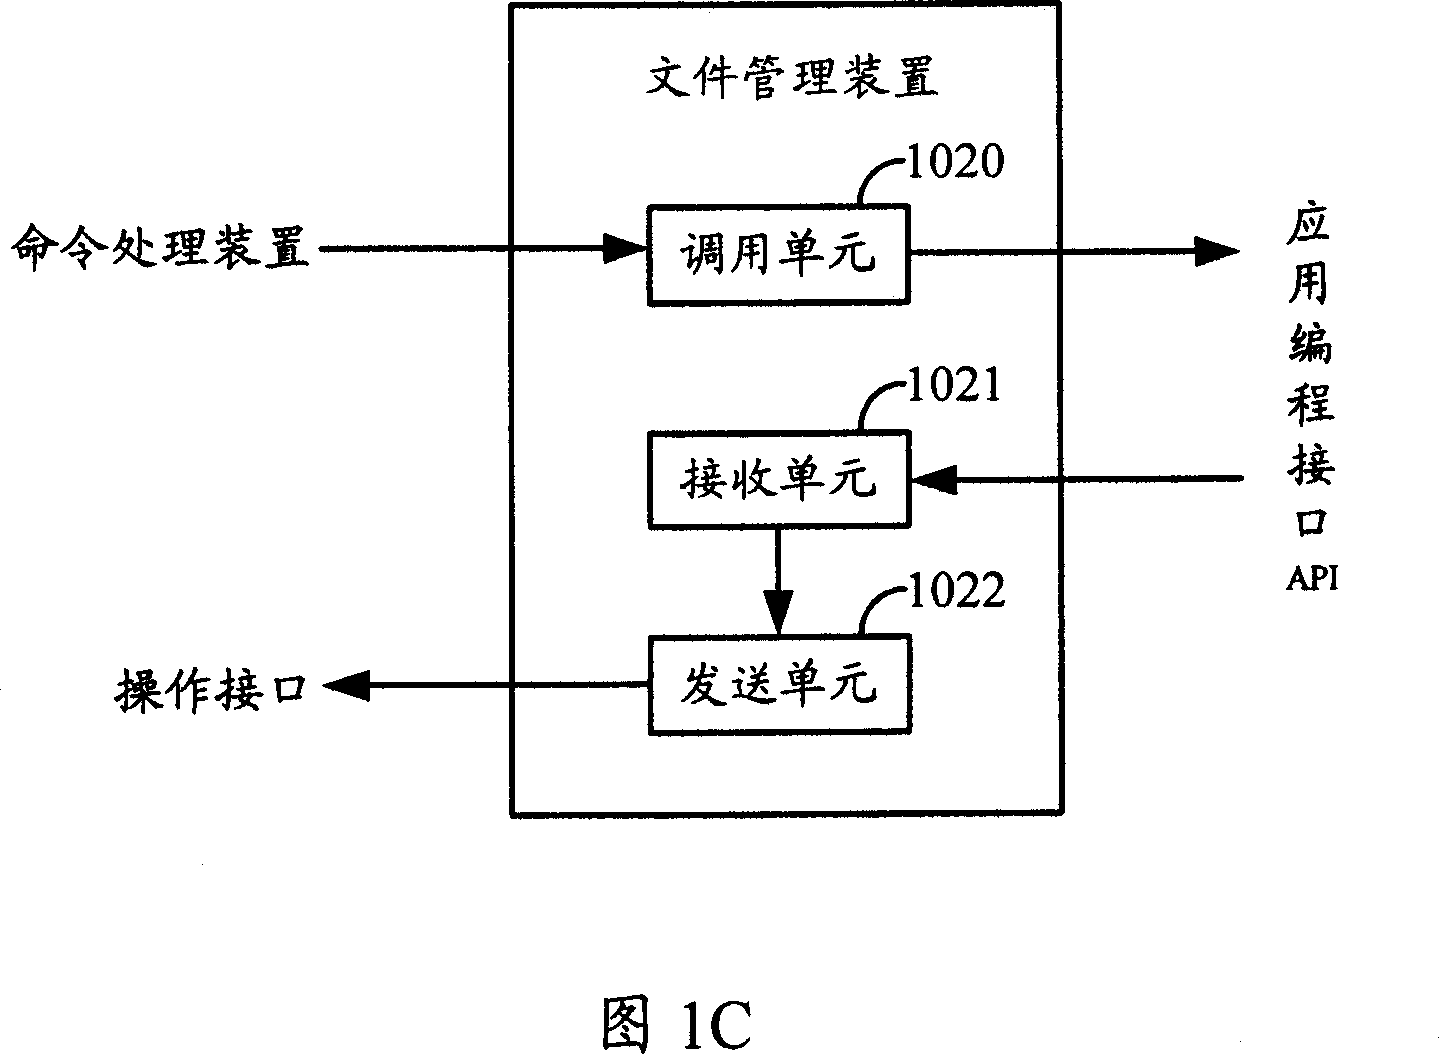 Method and system for testing embeded file system